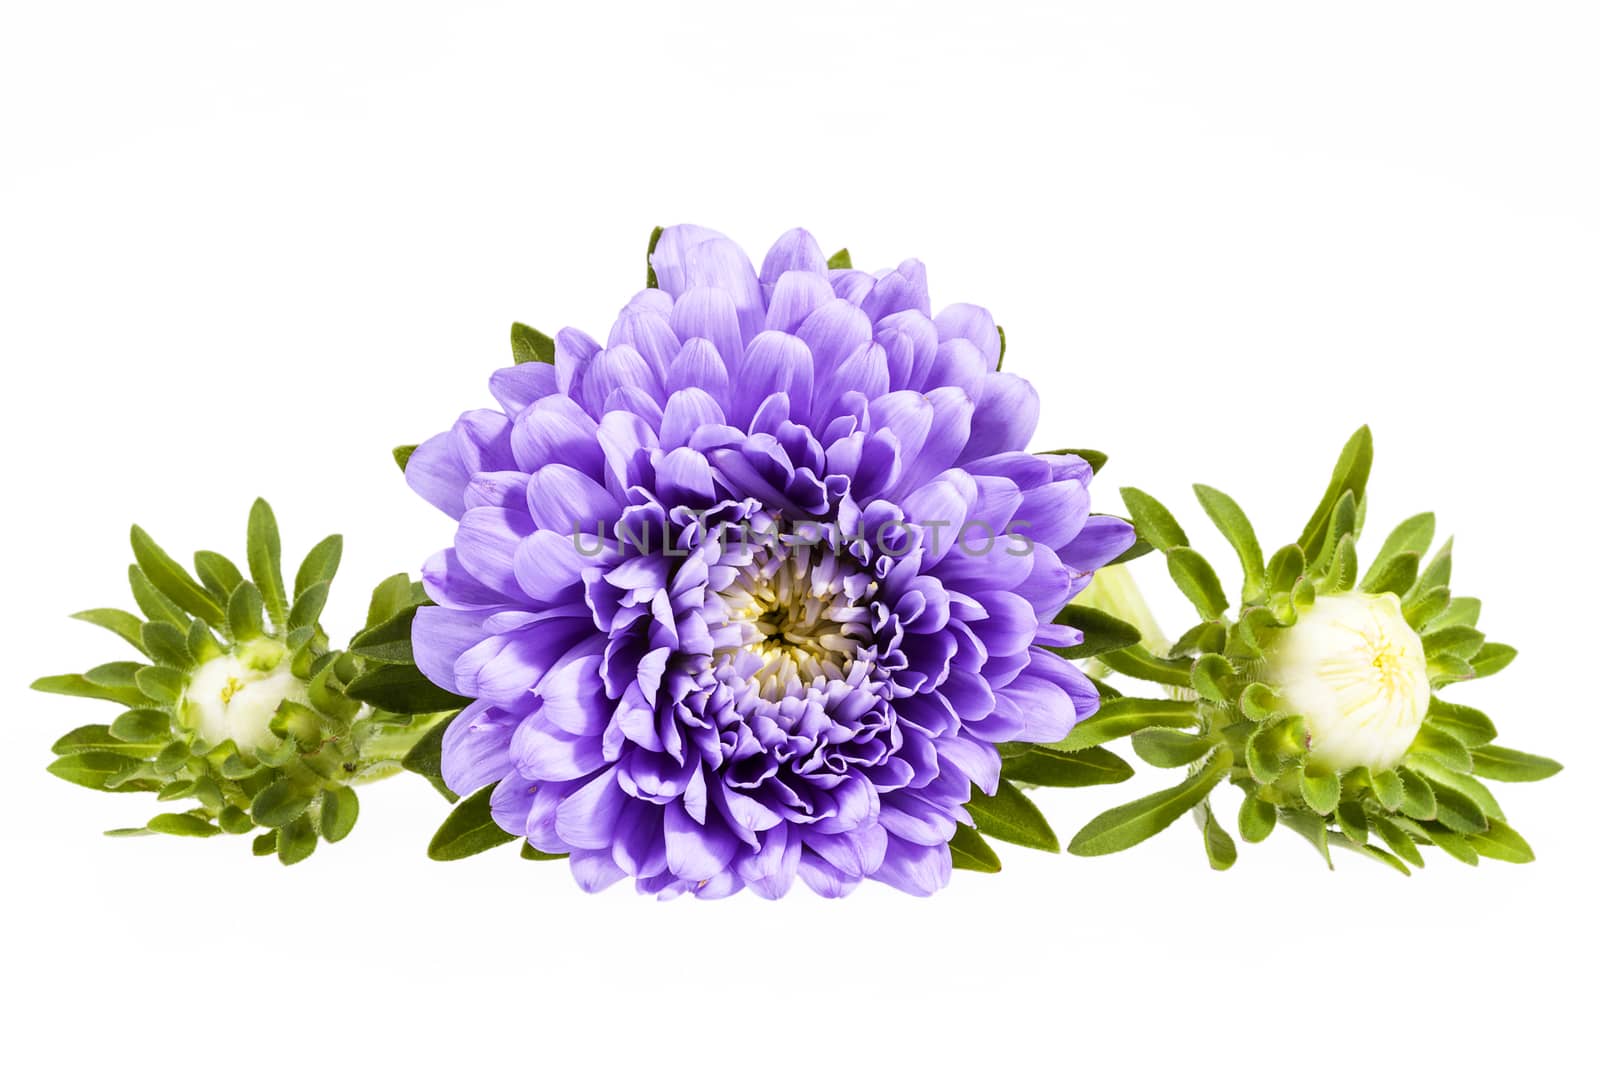 Single violet flower of aster isolated on white background by mychadre77